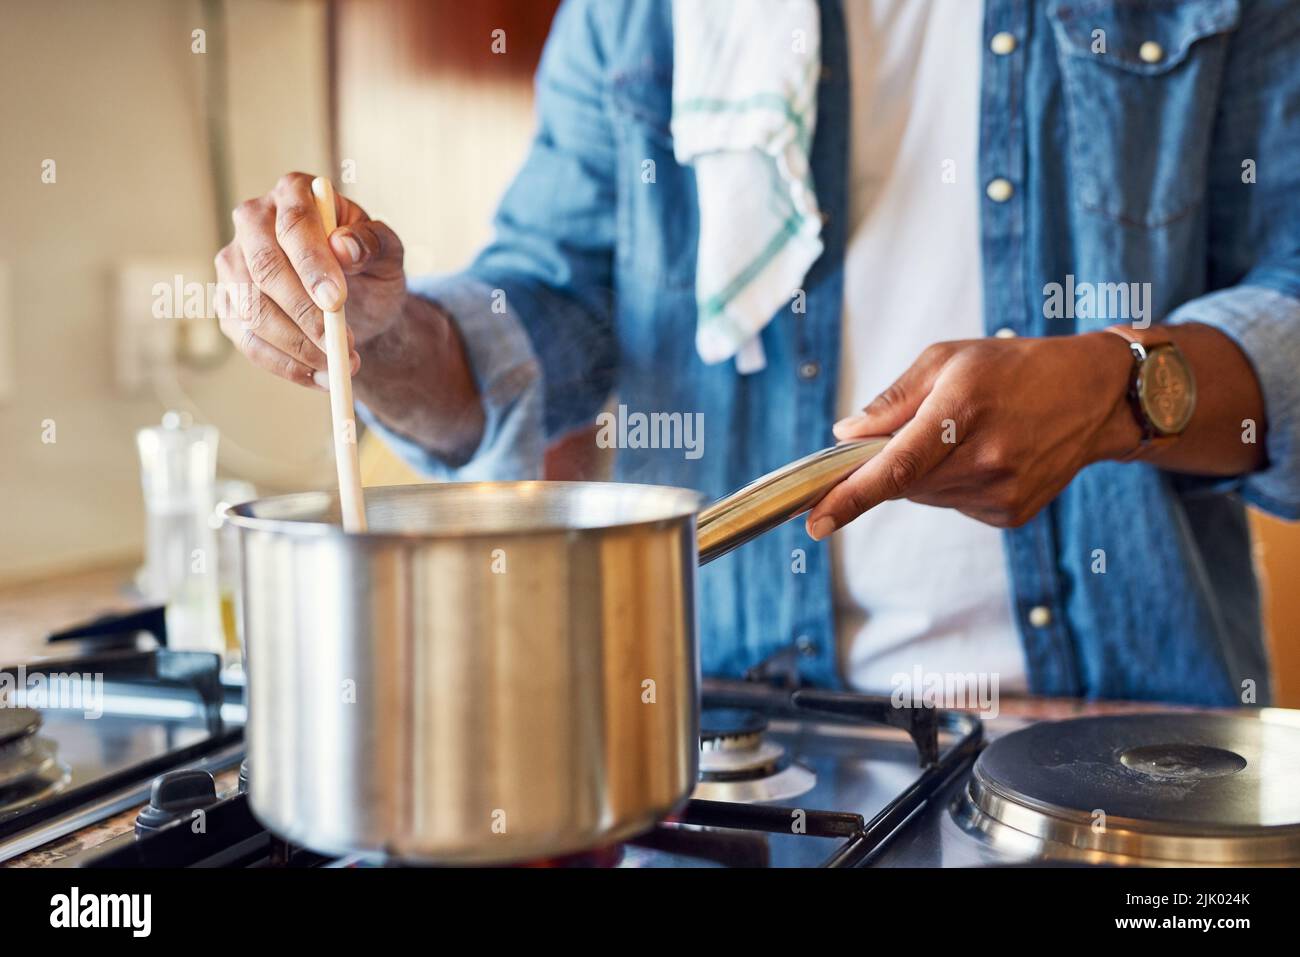 https://c8.alamy.com/comp/2JK024K/cooking-is-my-favourite-thing-to-do-at-home-a-young-man-stirring-a-pot-in-his-kitchen-at-home-2JK024K.jpg